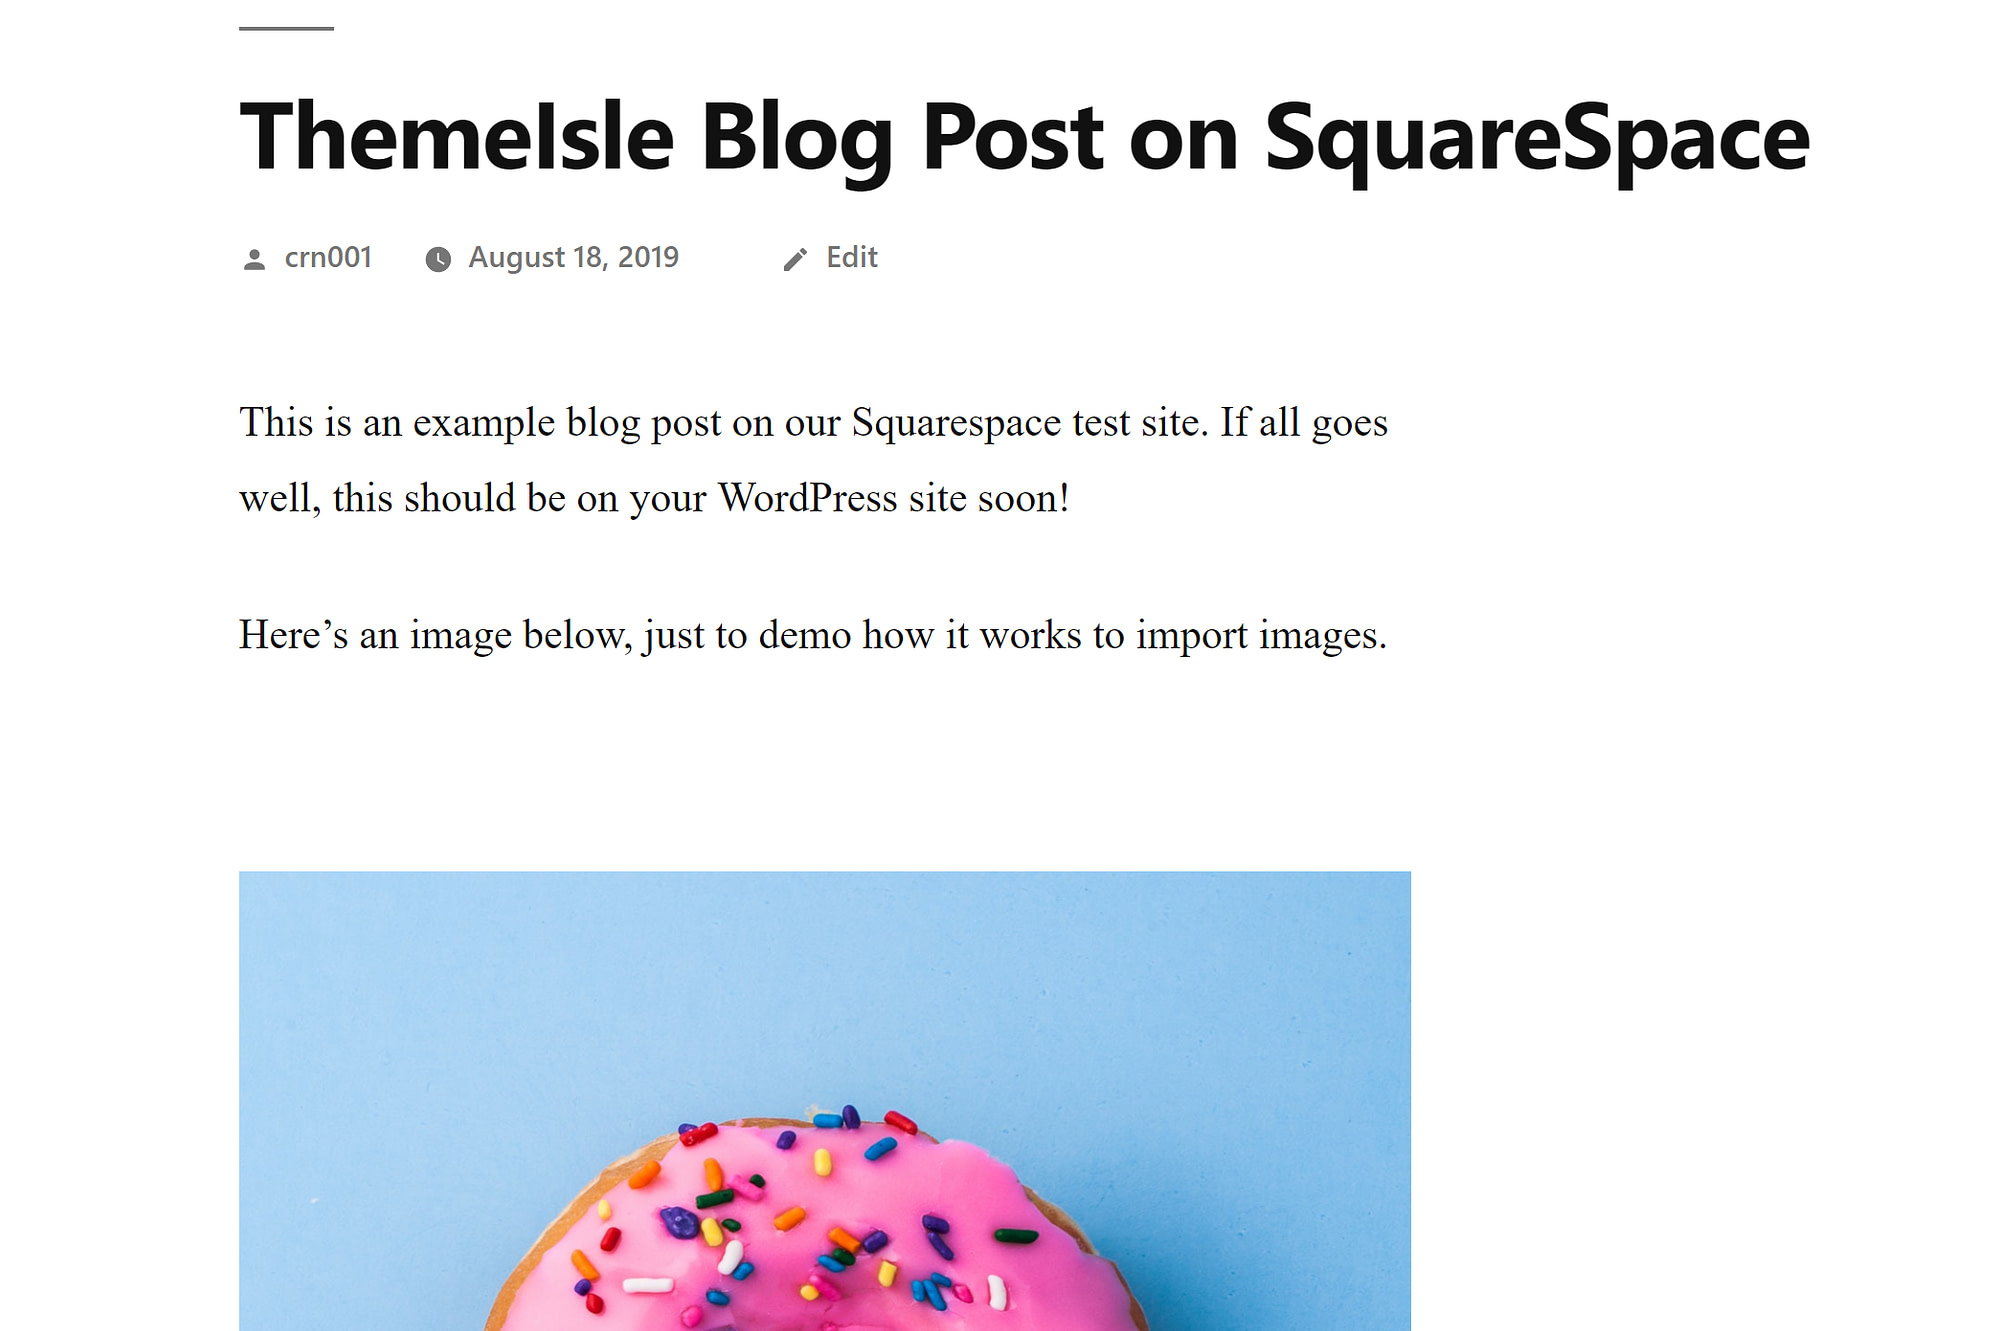 How to switch blog post from Squarespace to WordPress